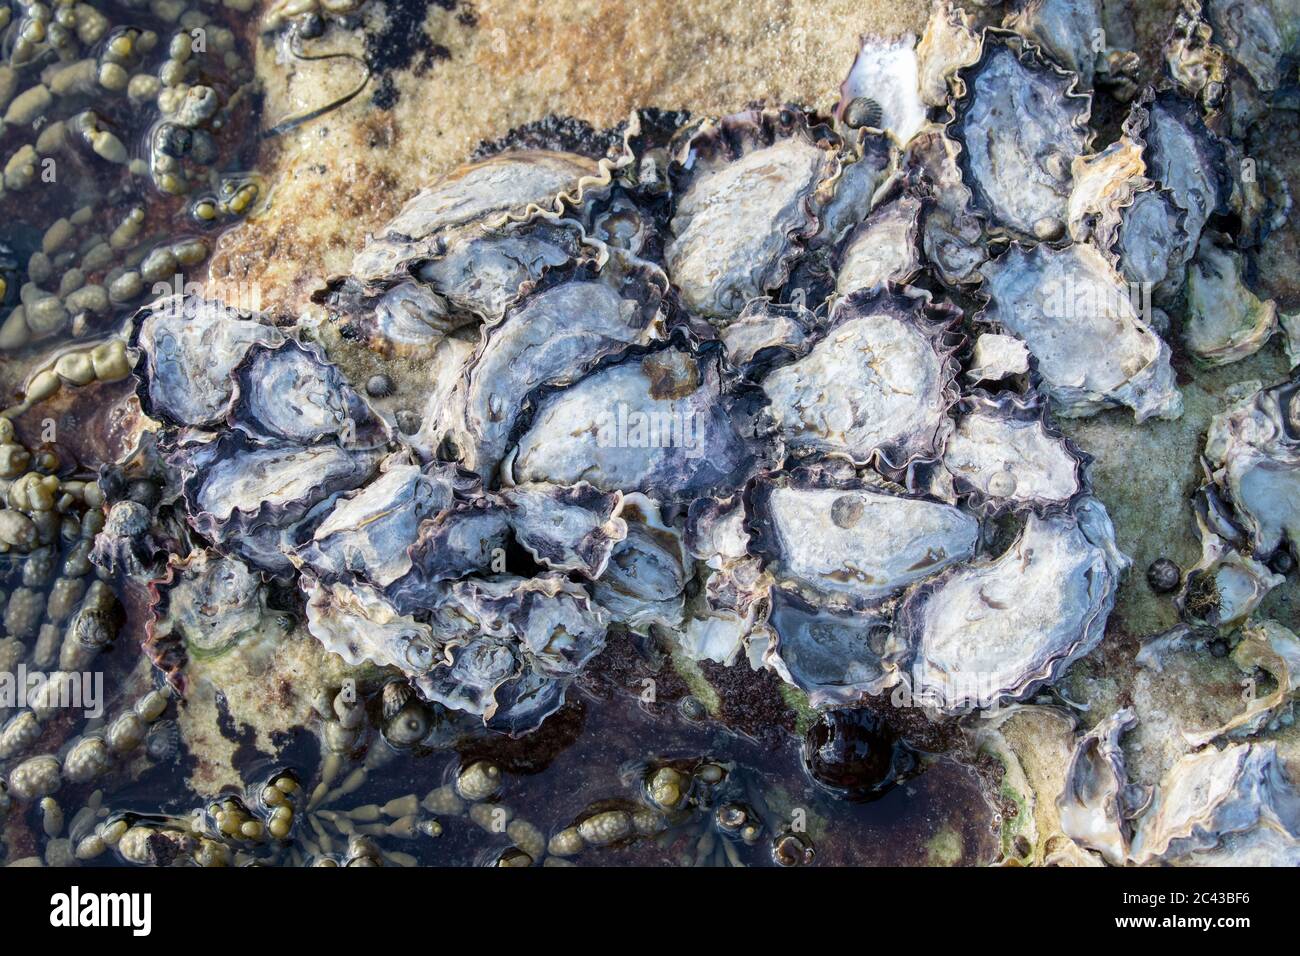 Sydney Rock Oysters growing on rocks in the inter-tidal zone Stock Photo